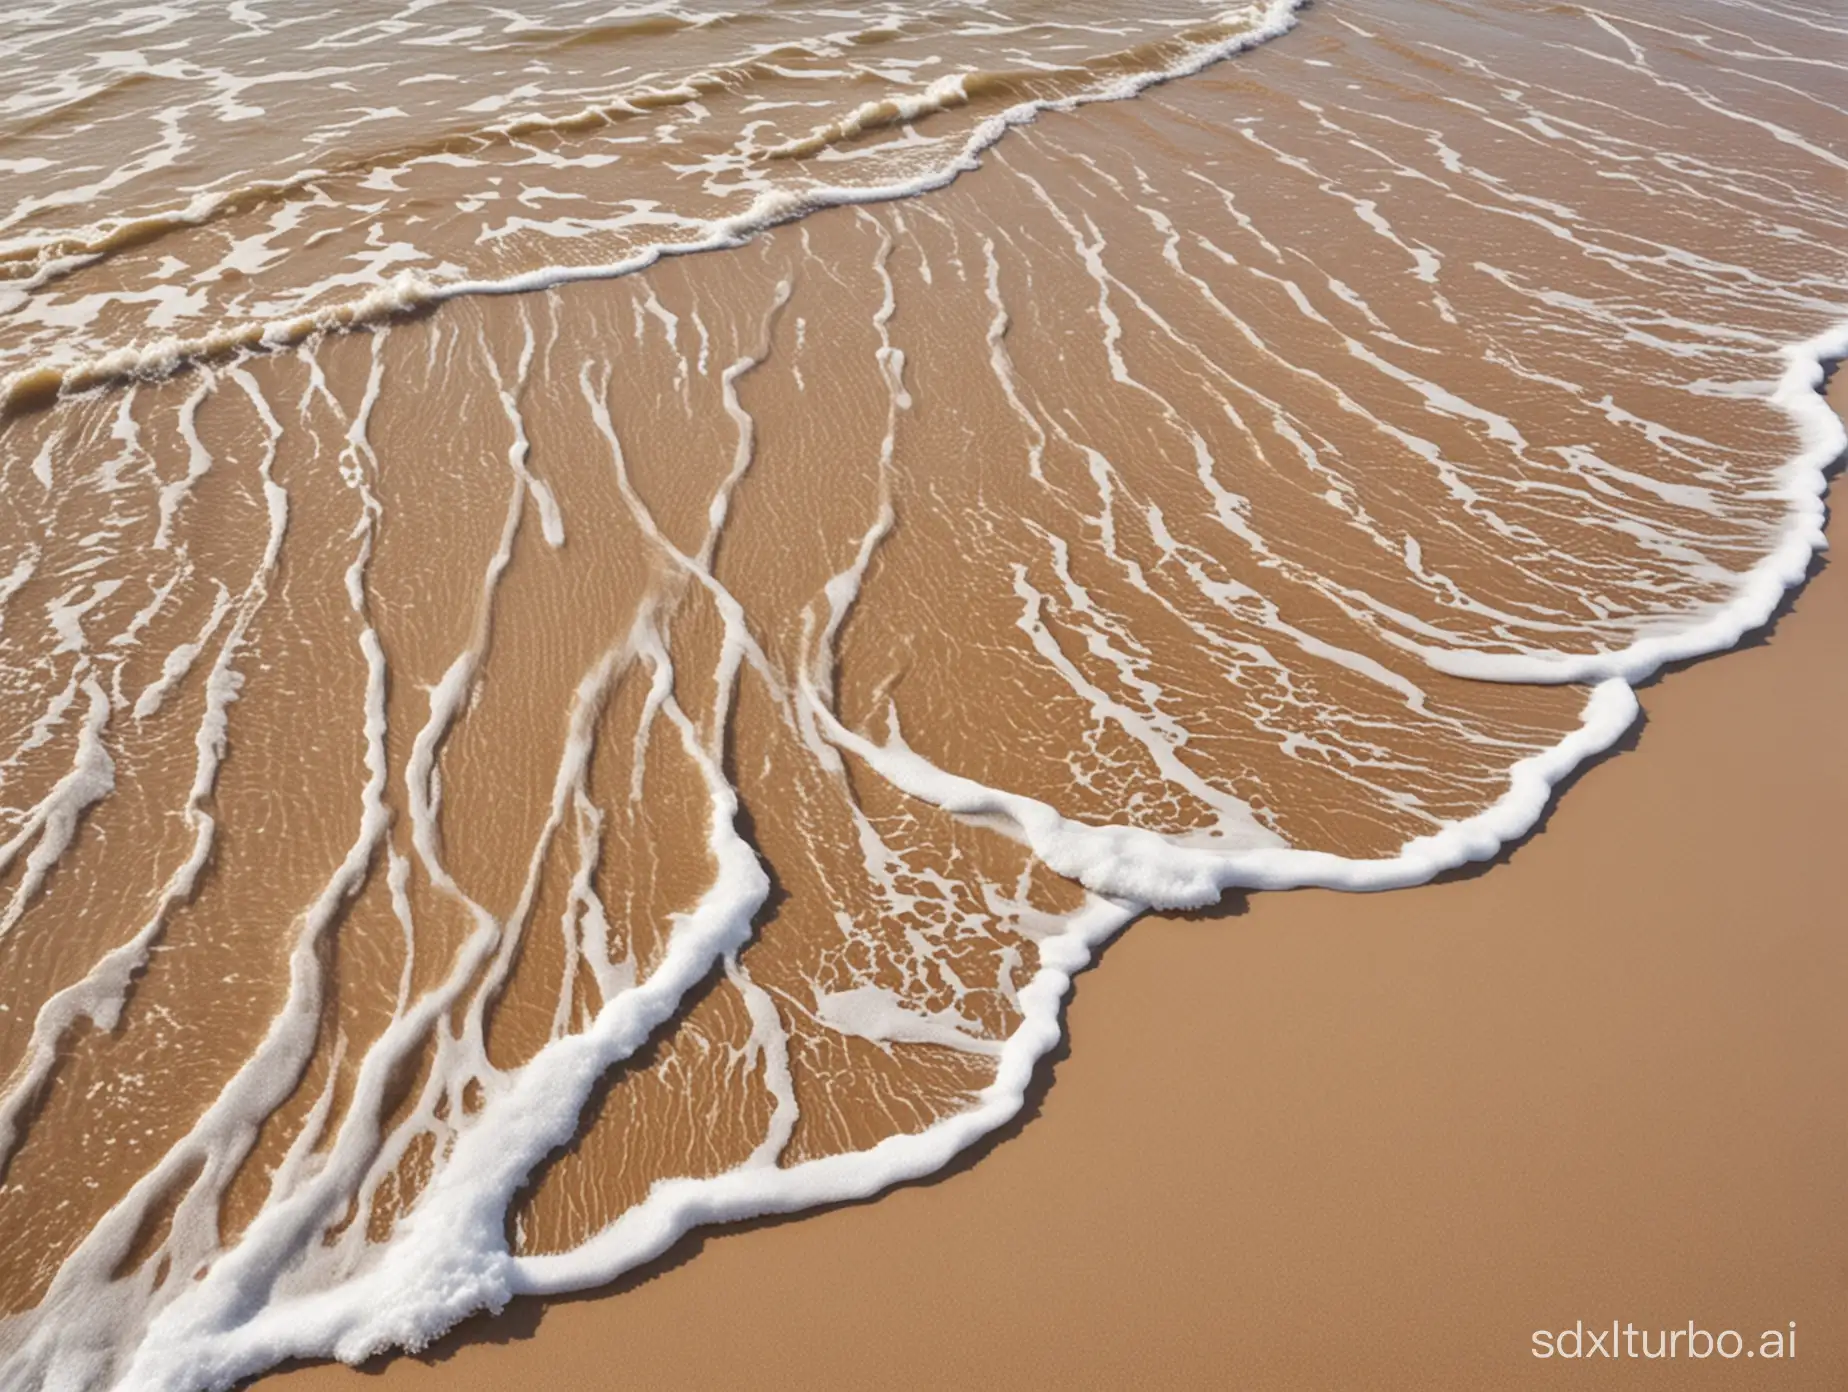 Gentle waves caress the sandy shore